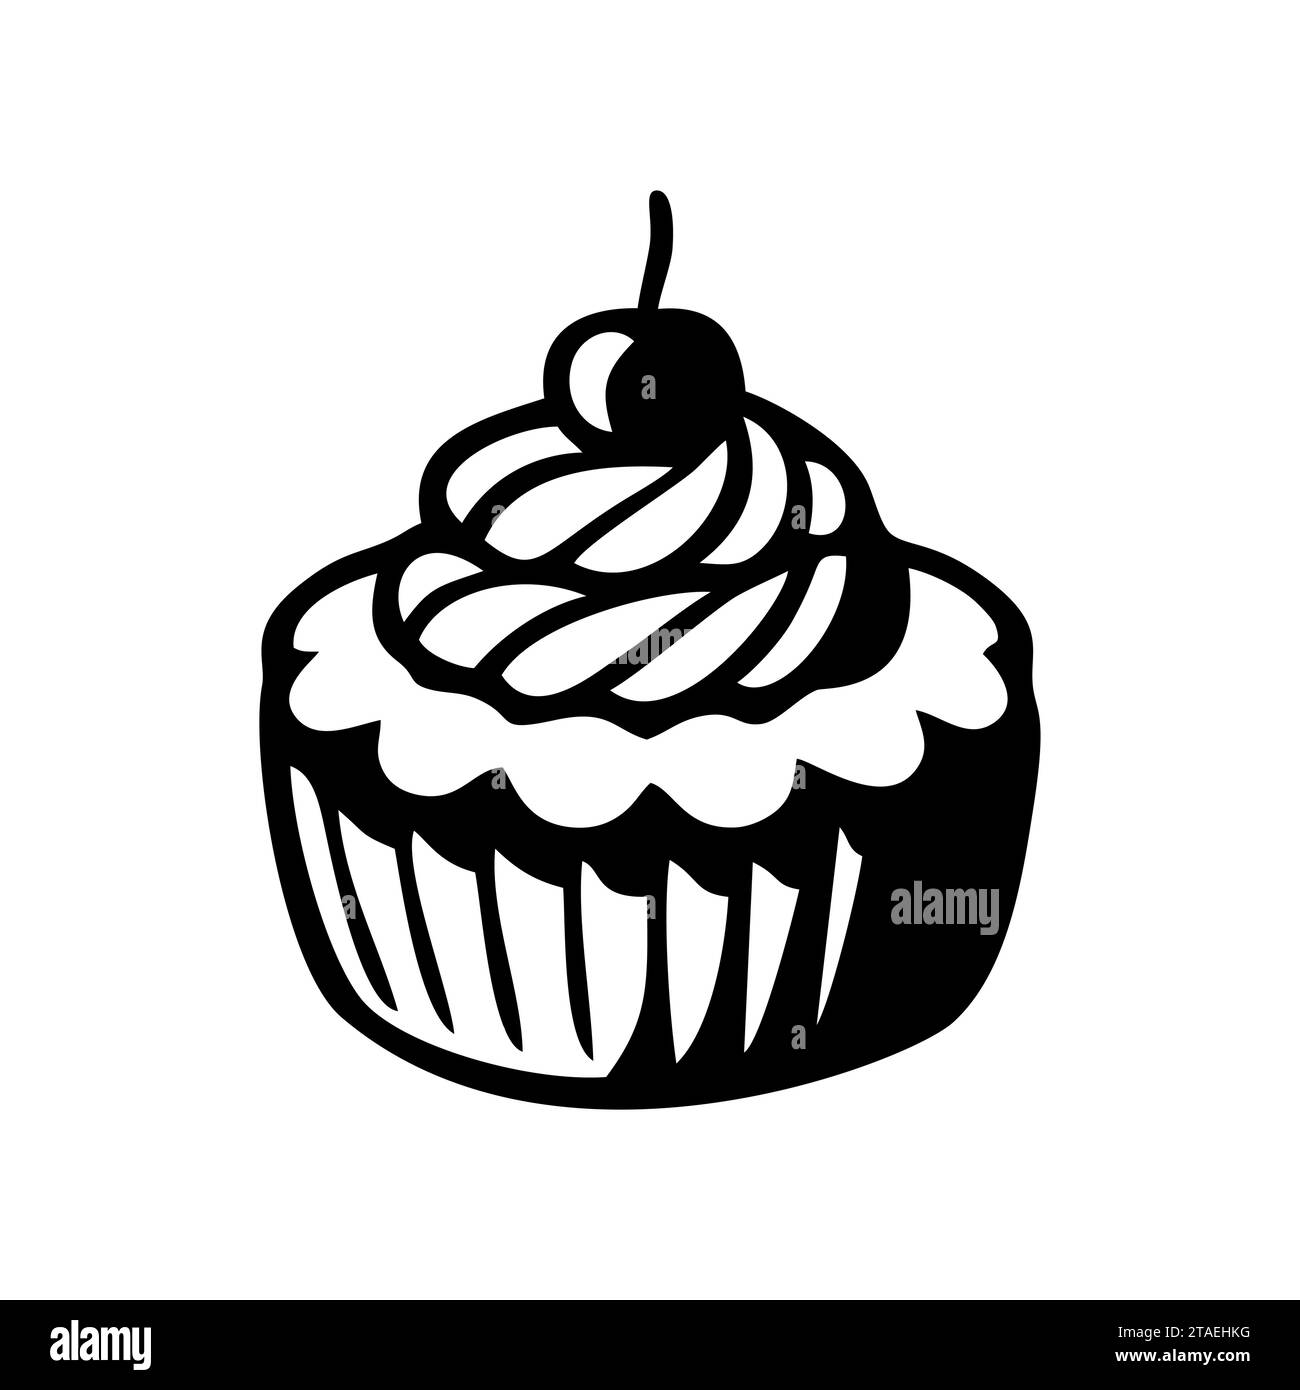 Cupcake dessert black icon, sweet food. Simple delicious symbol. Sweet birthday cake, Bakery cake isolated on white. Vector illustration. Stock Vector